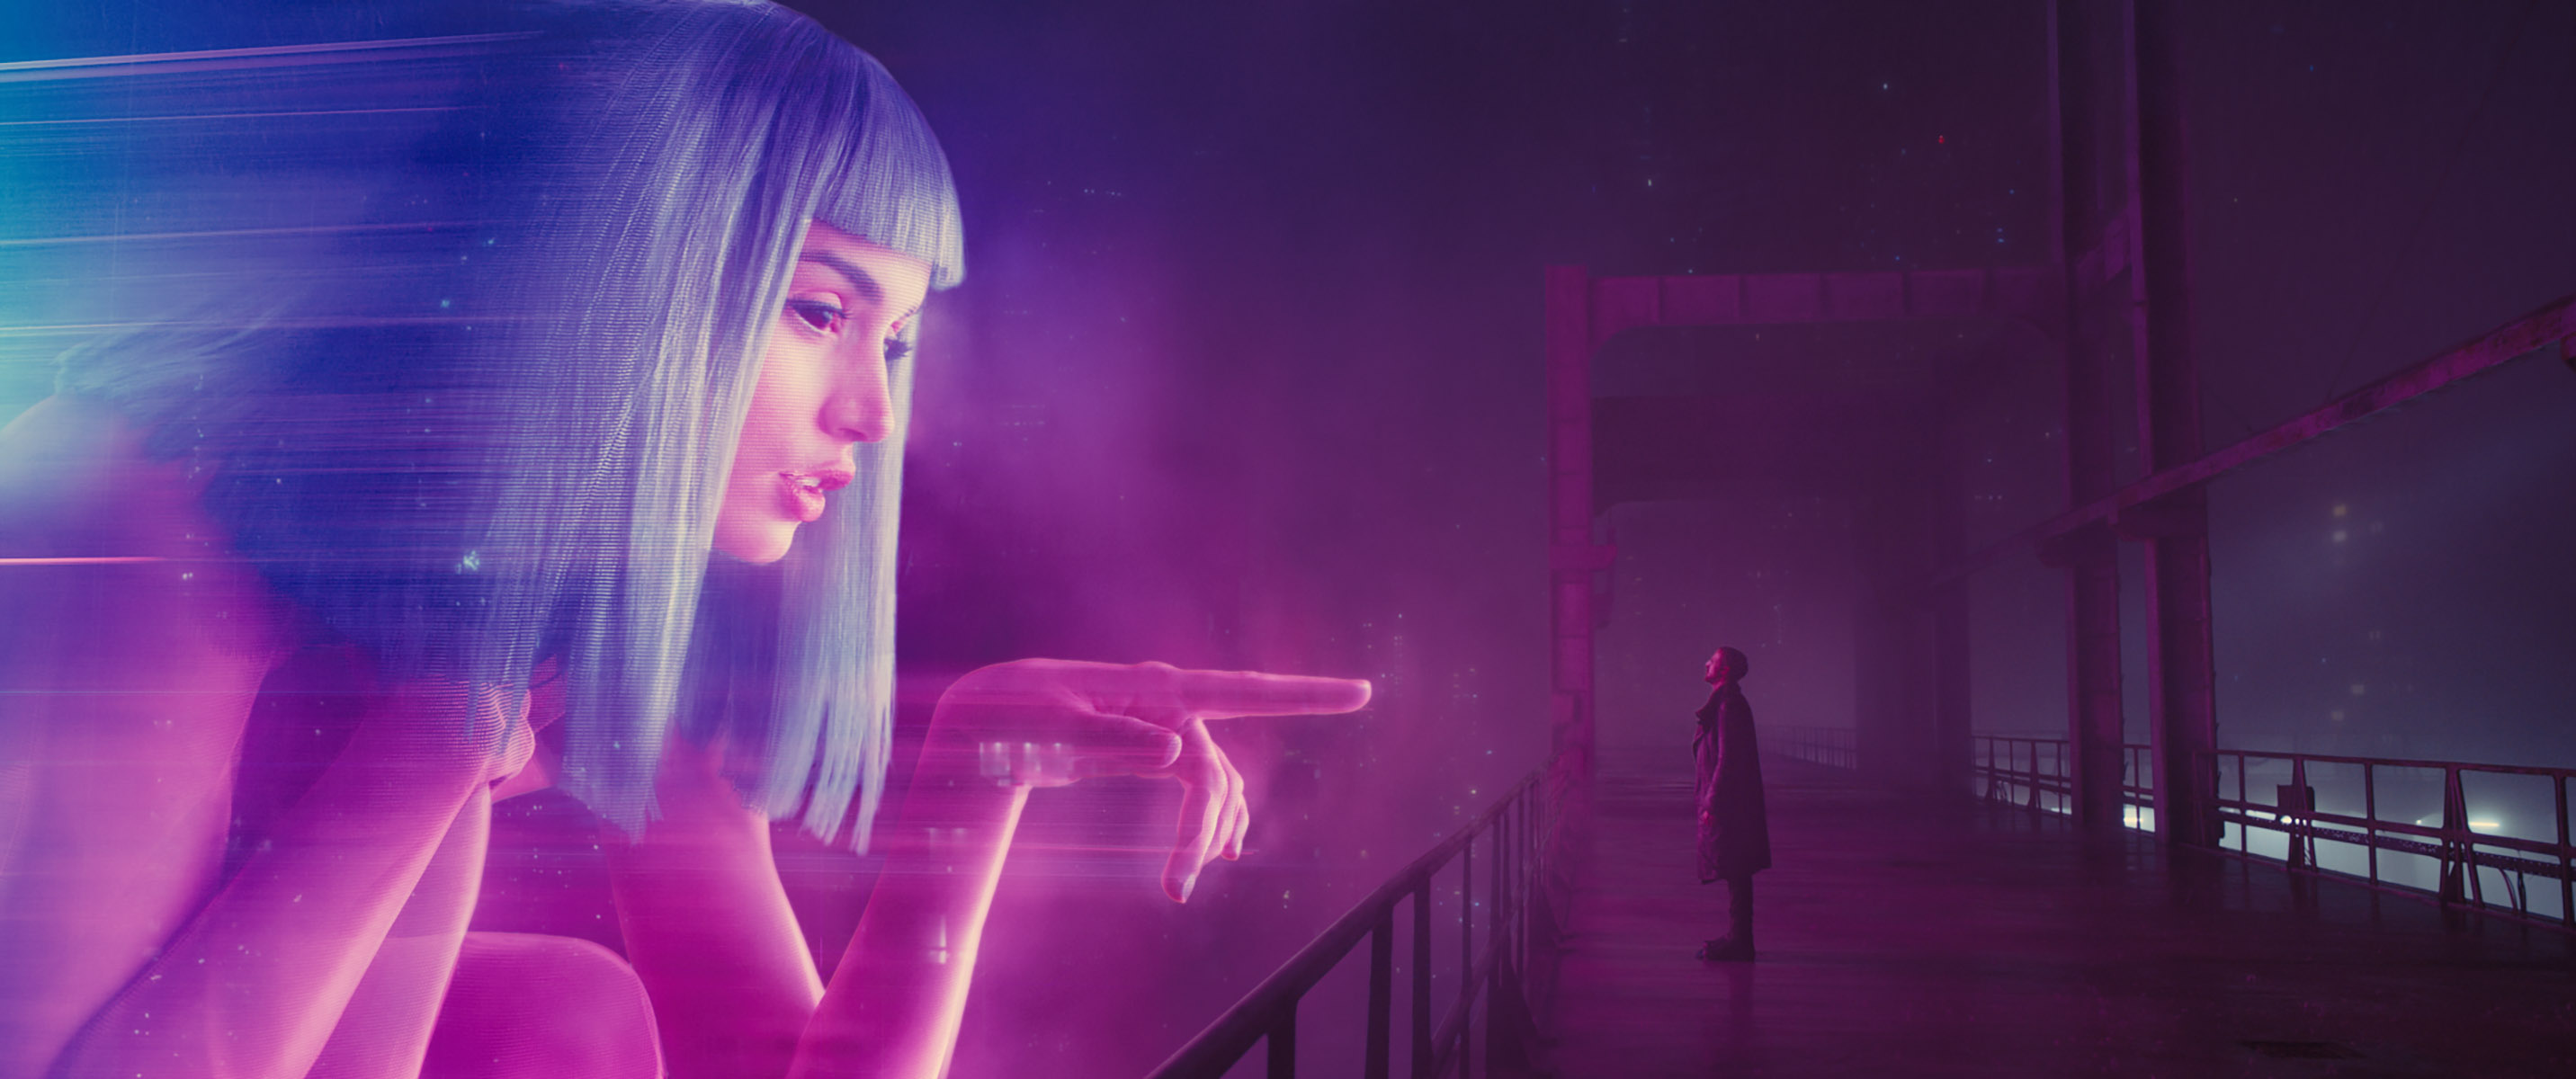 Blade Runner 2049 (review): Do Androids Dream of Breathtaking Sequels?